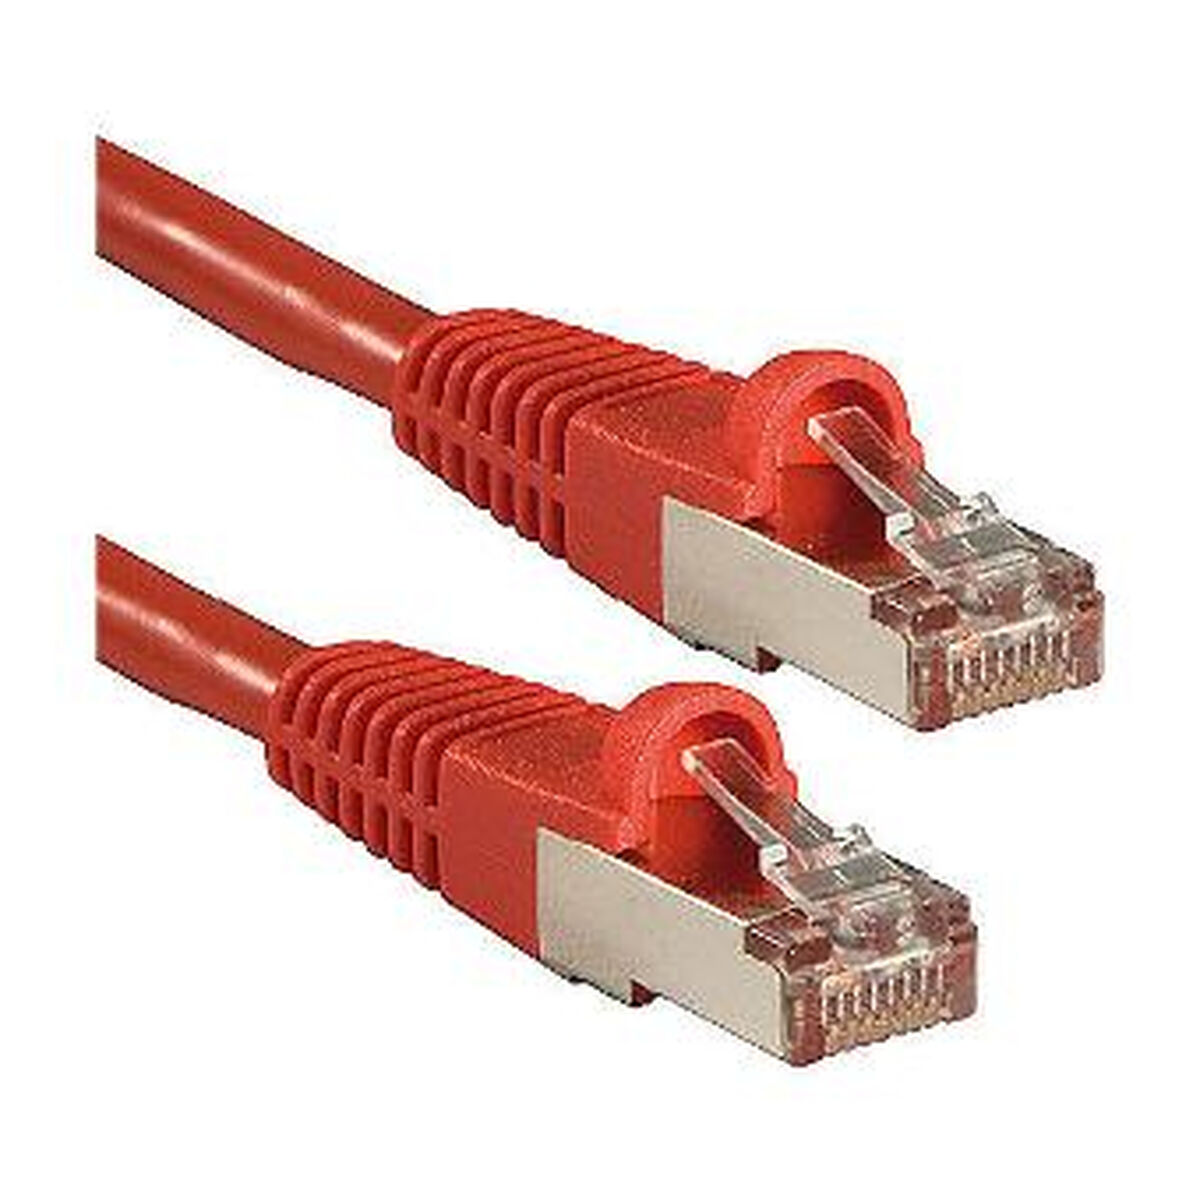 UTP Category 6 Rigid Network Cable LINDY 47166 Red 5 m 1 Unit